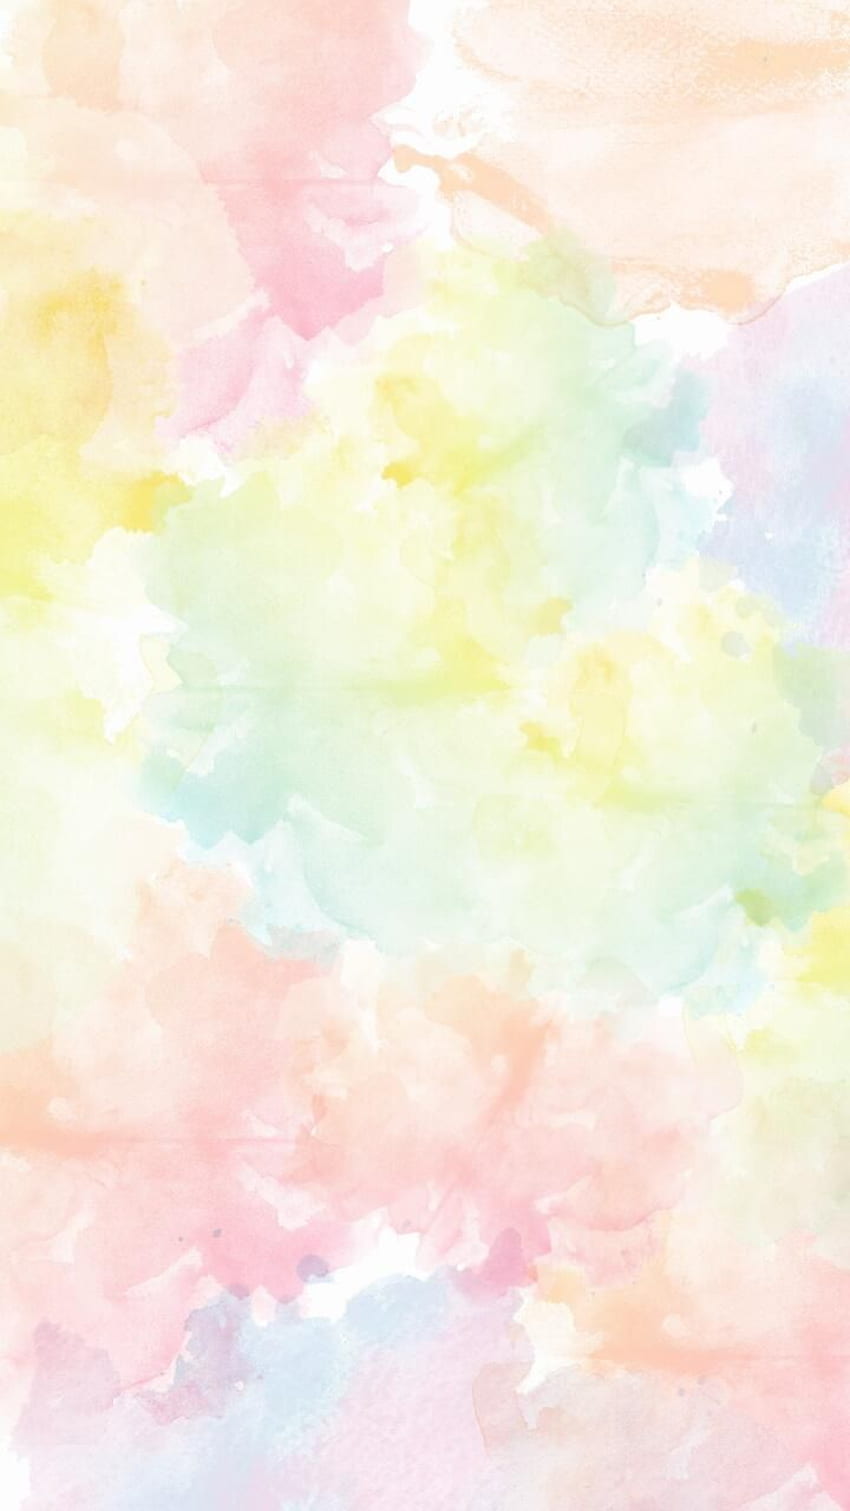 Watercolor Wallpaper Images HD Pictures For Free Vectors Download   Lovepikcom